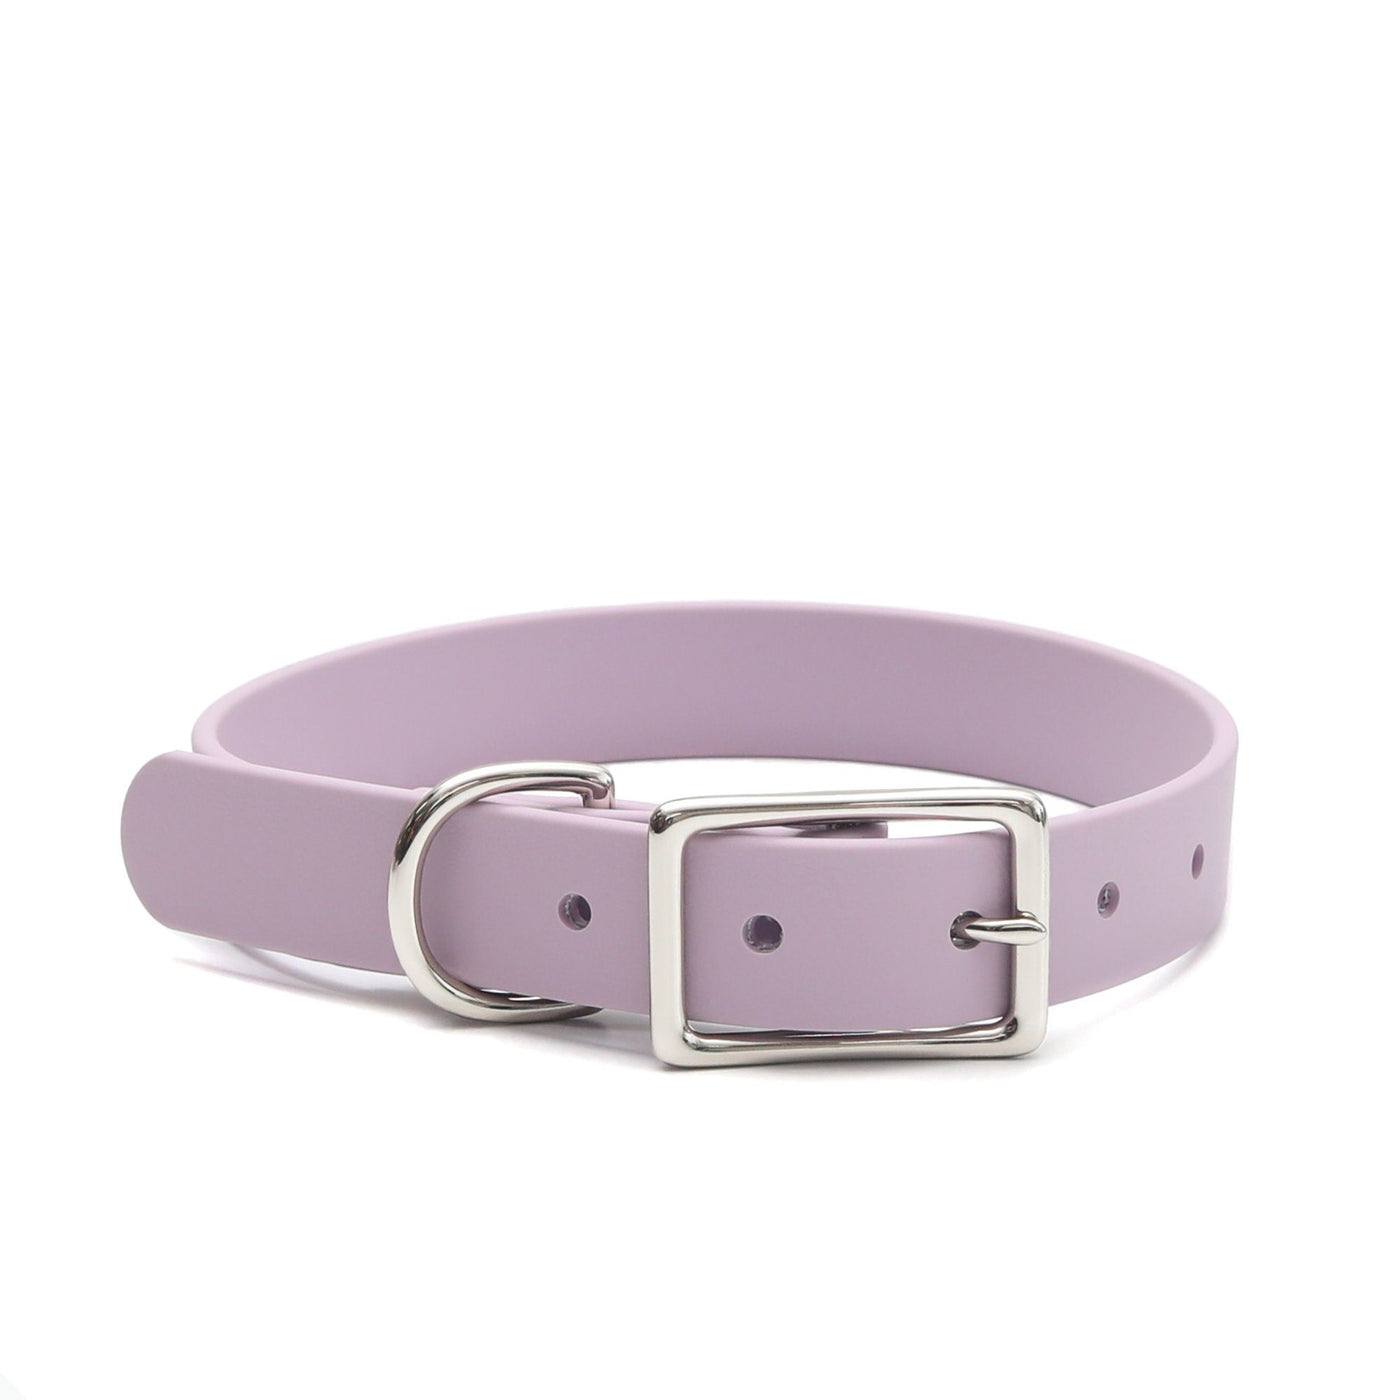 Mimi Green Waterproof Personalized Dog Collar Collar Mimi Green 7 to 10 inches (5/8" width) Lavender 